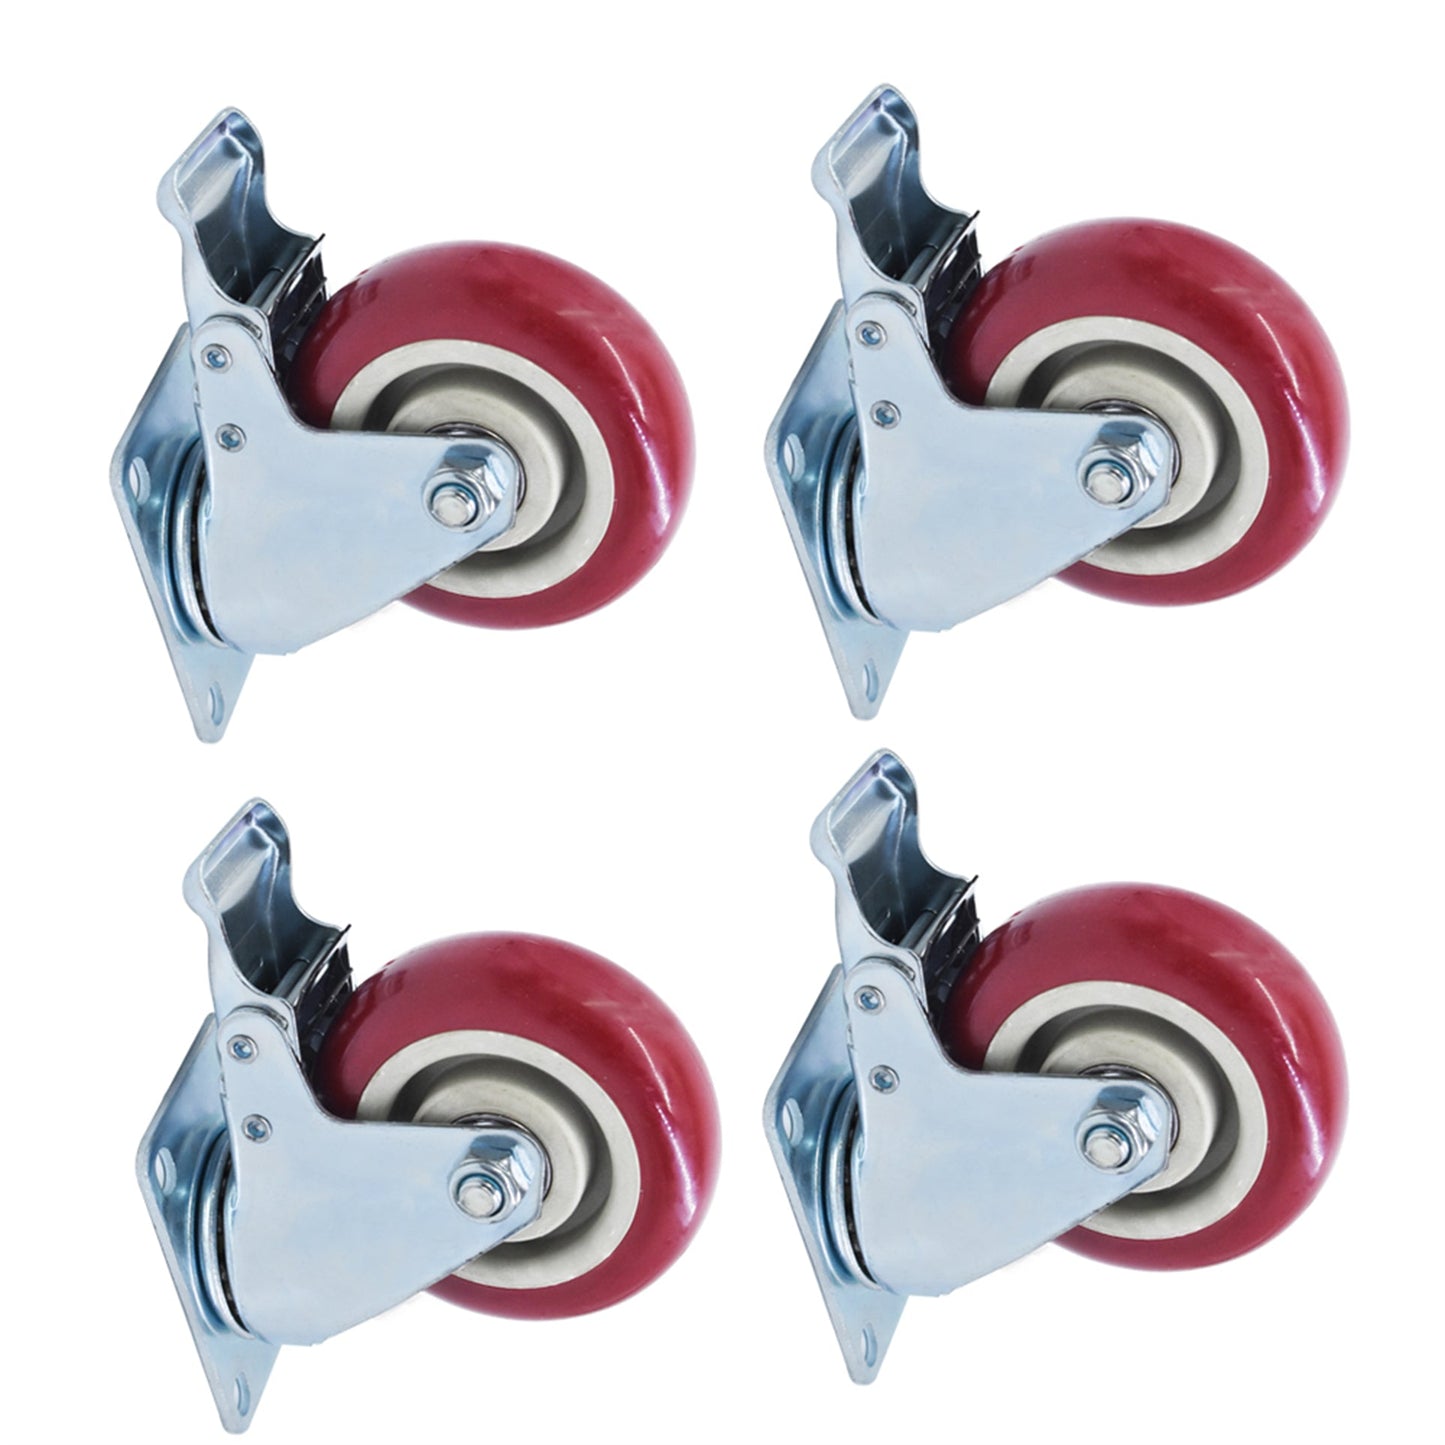 findmall  4 Inch Heavy Duty Swivel Casters Wheels with Brake No Noise Locking Casters 4 Pack FINDMALLPARTS